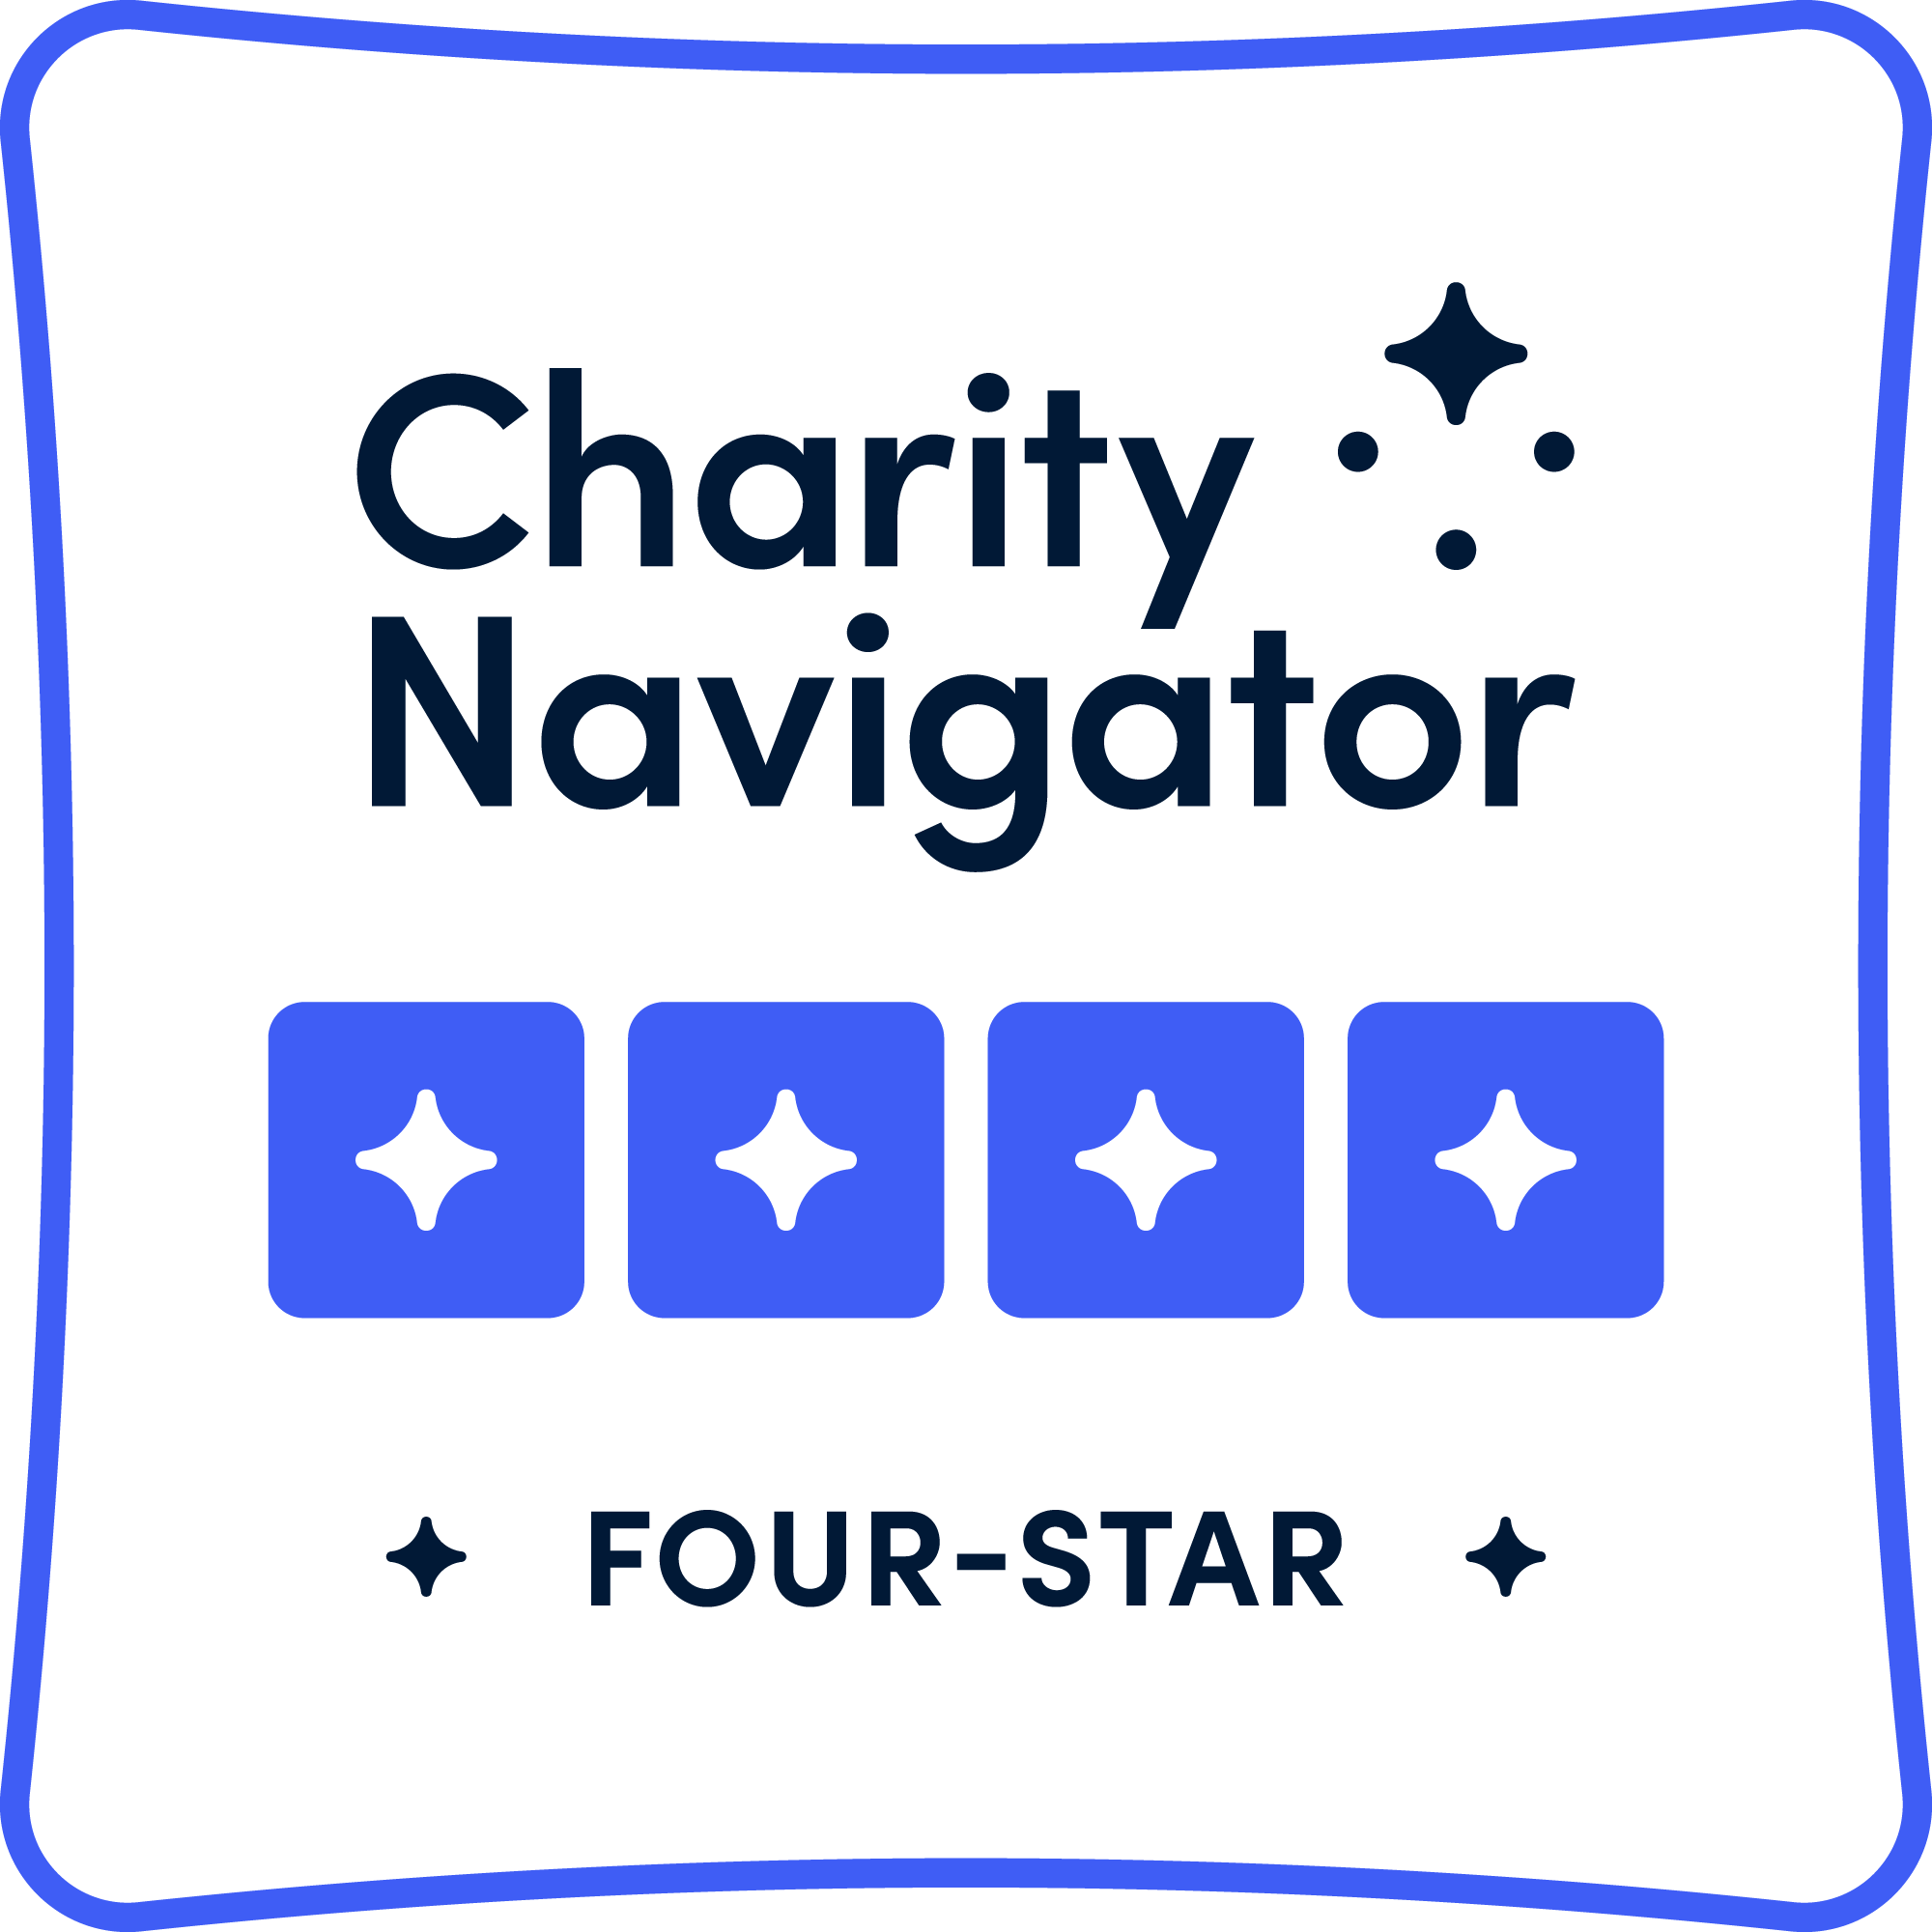 Receives Four-Star Rating with Charity Navigator 🌟🌟🌟🌟